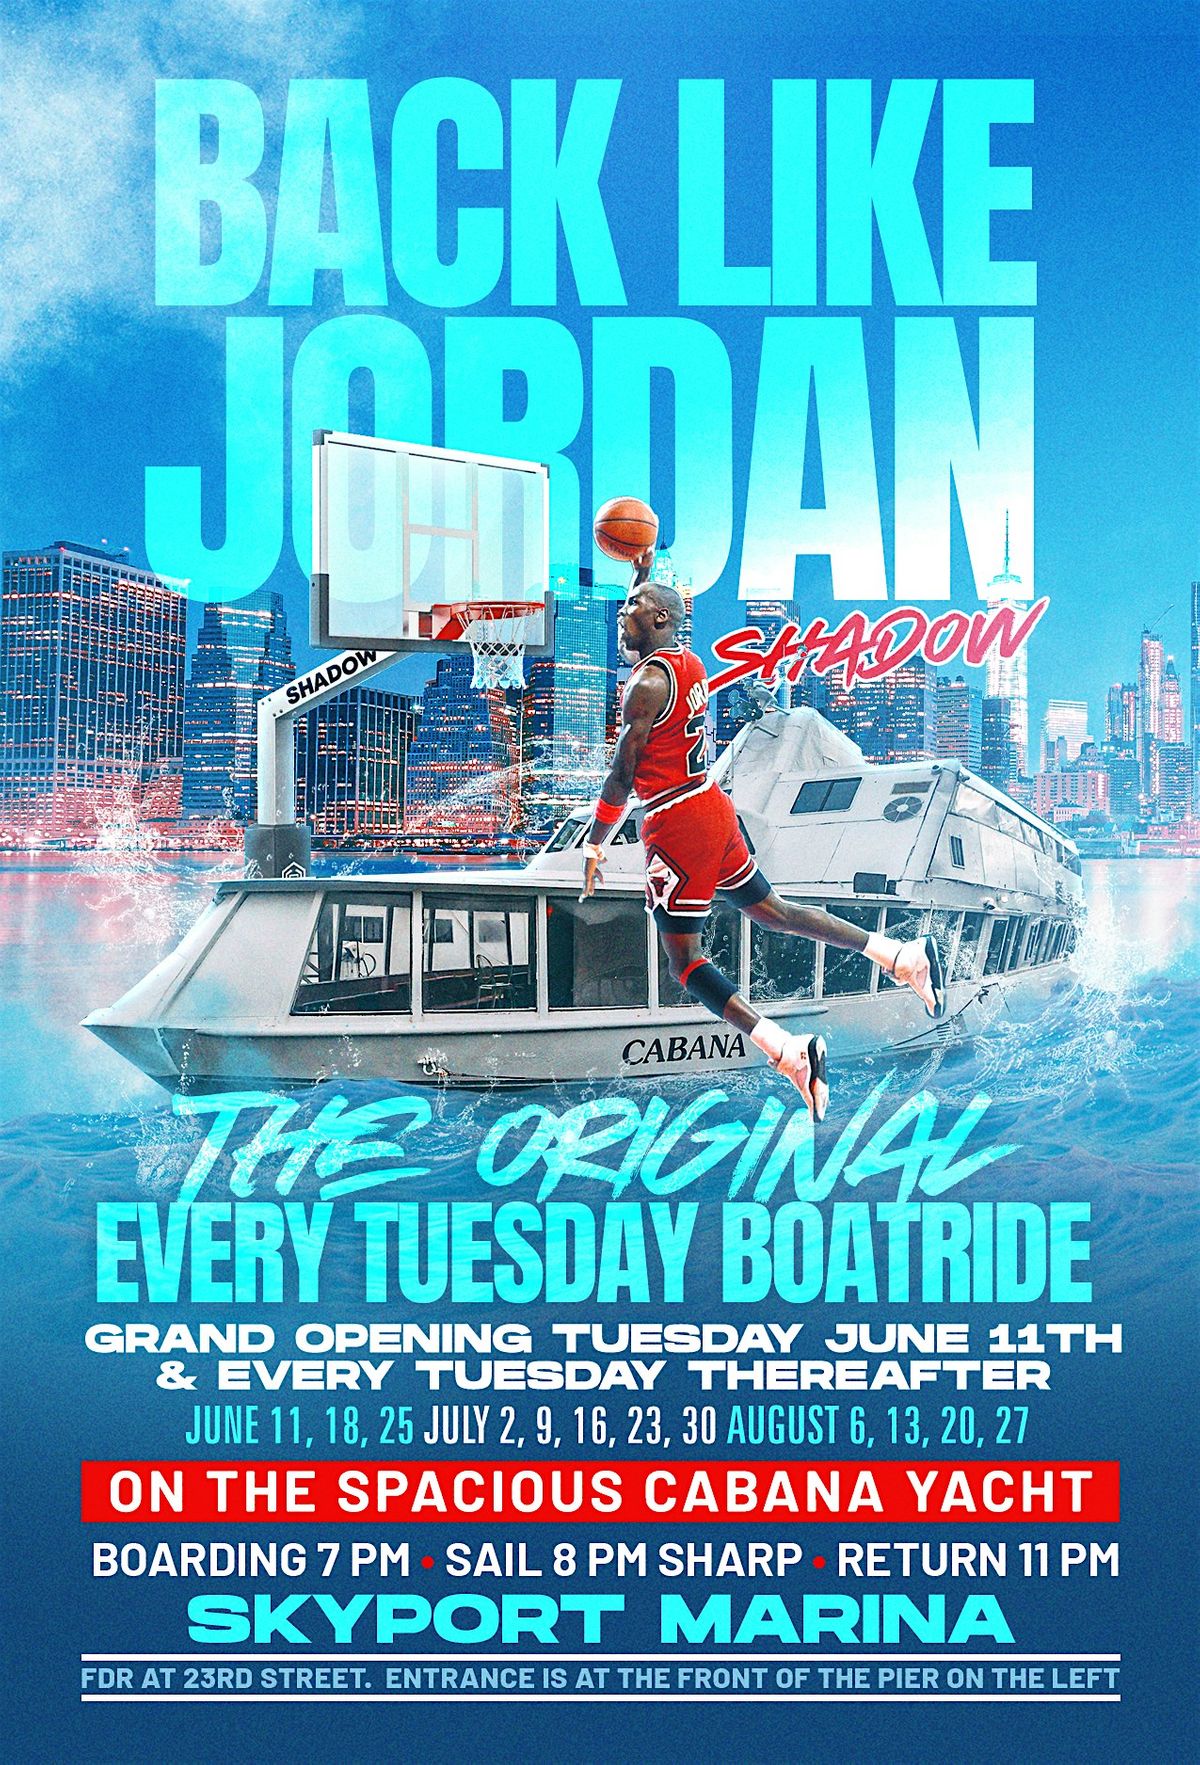 EVERY TUESDAY BOATRIDE IS BACK!